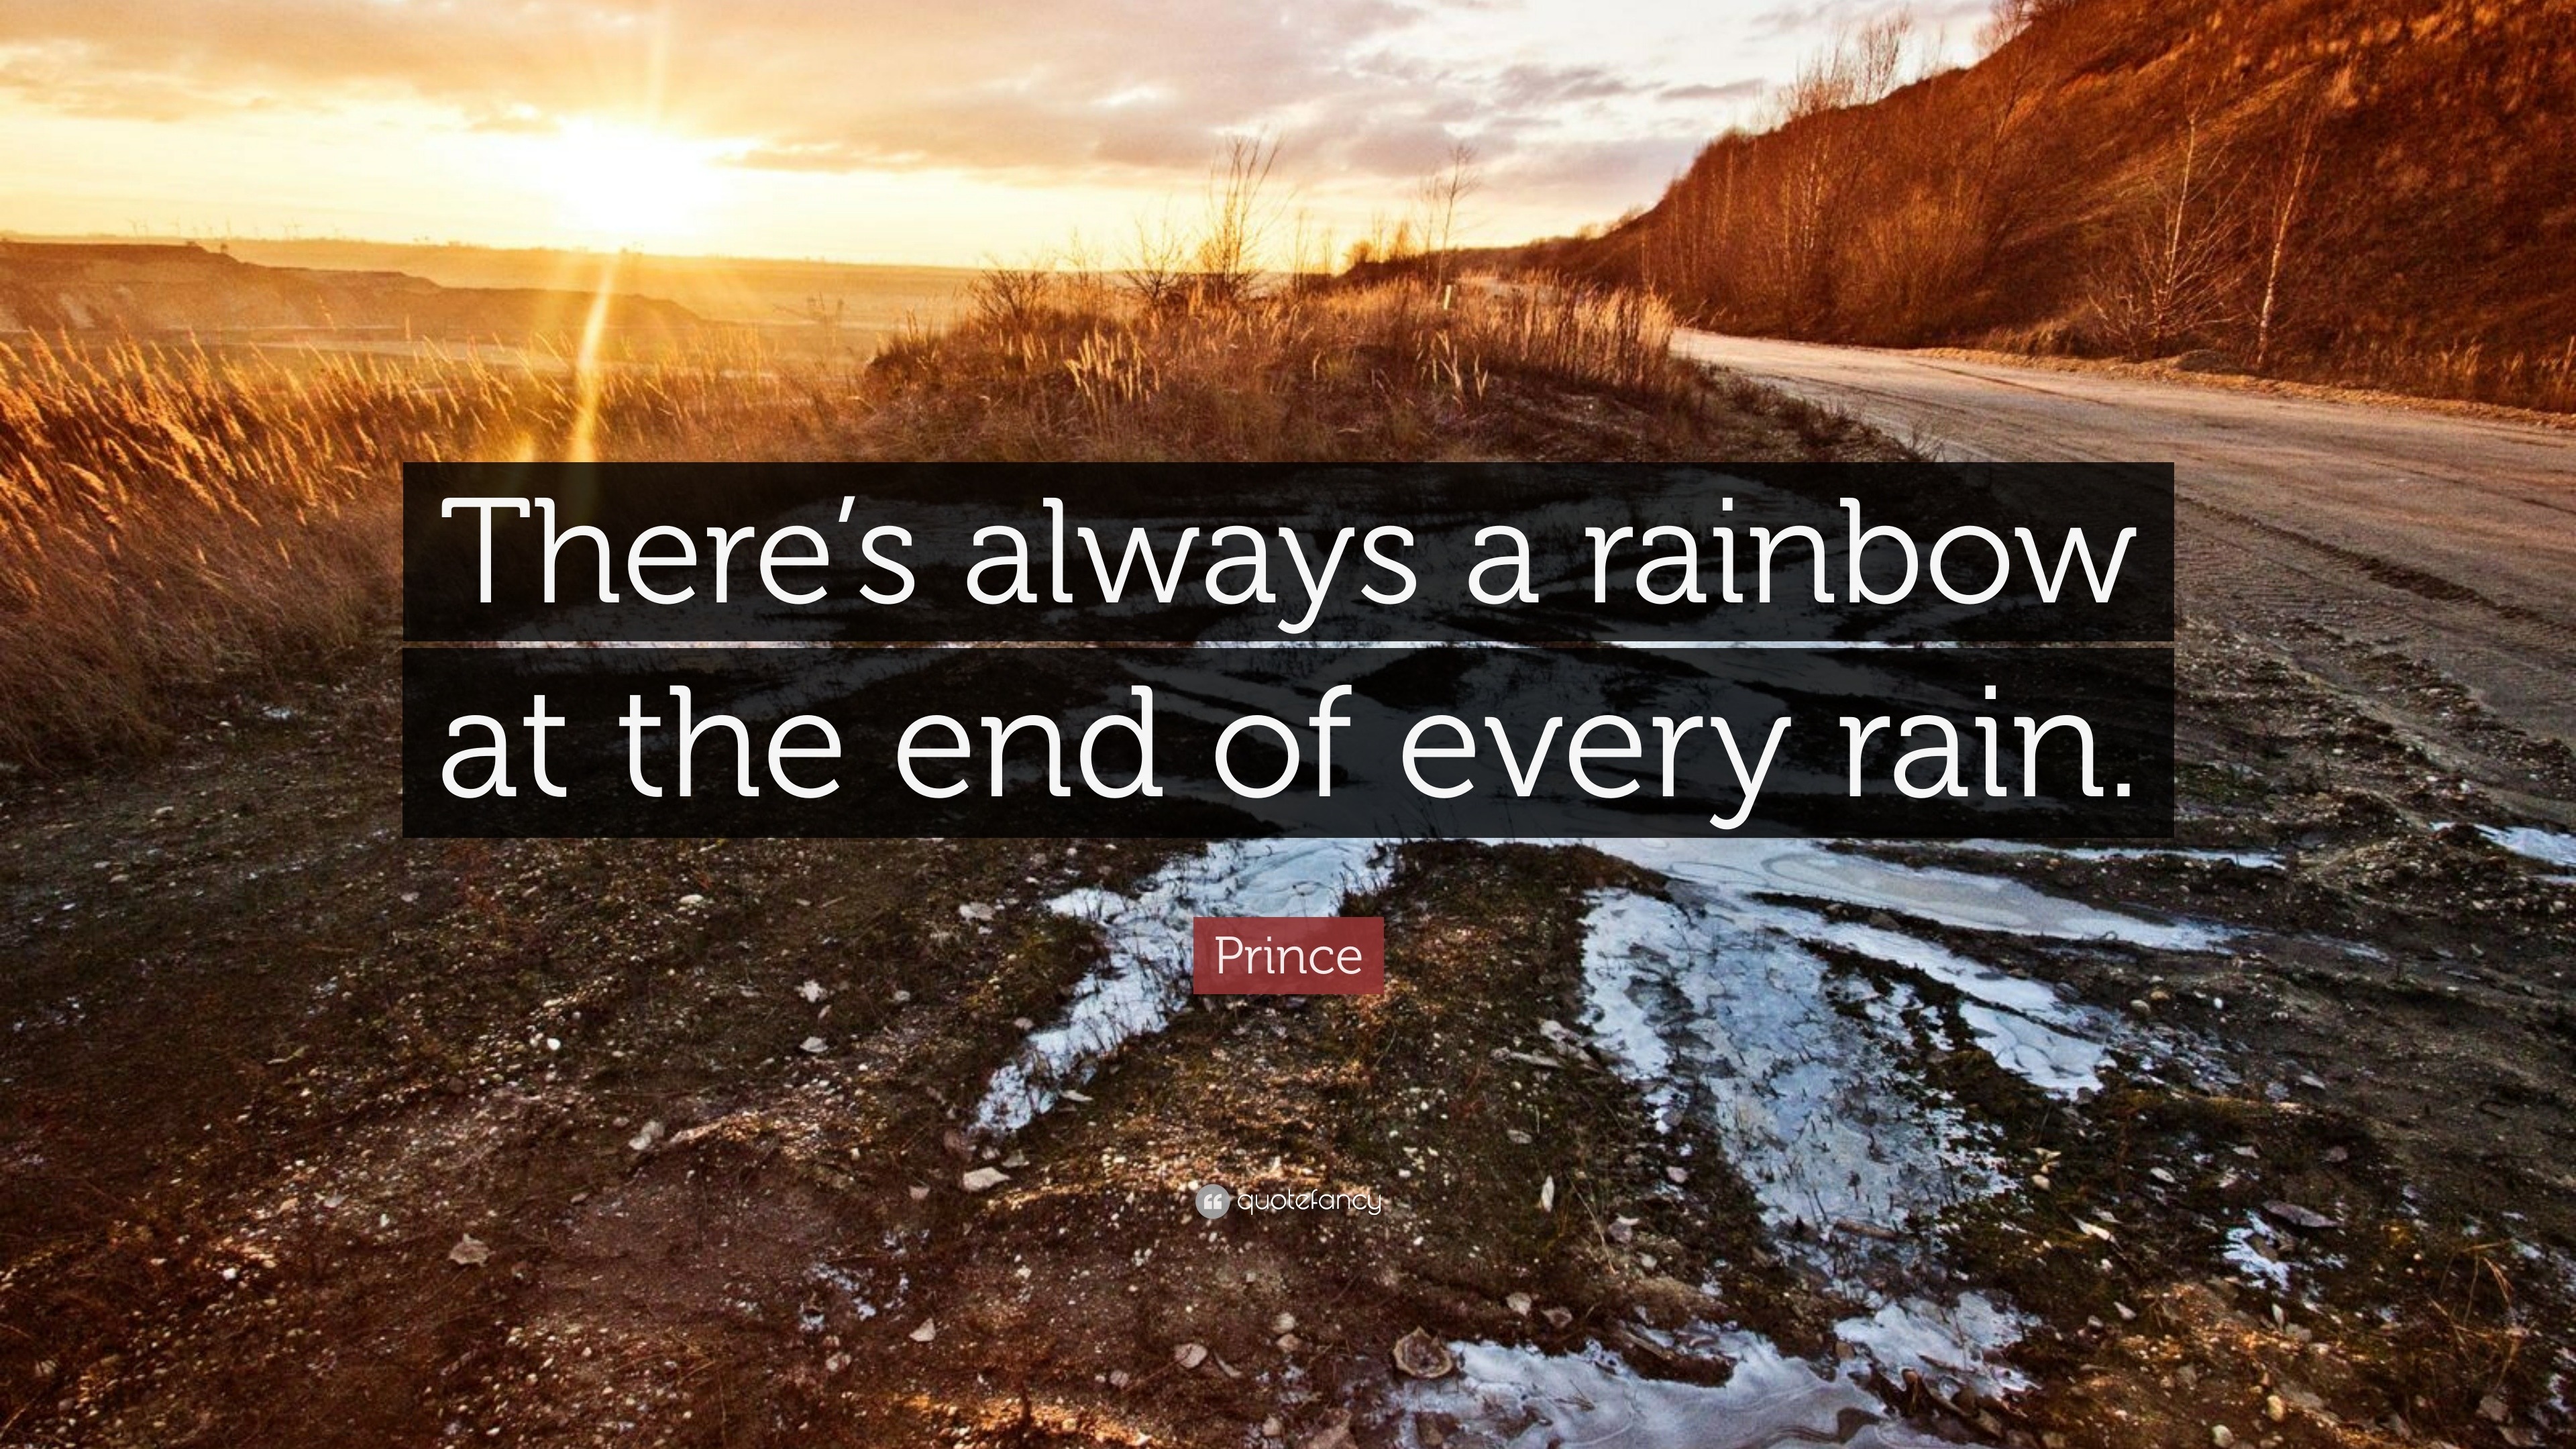 Prince Quote: “There’s always a rainbow at the end of every rain.” (12